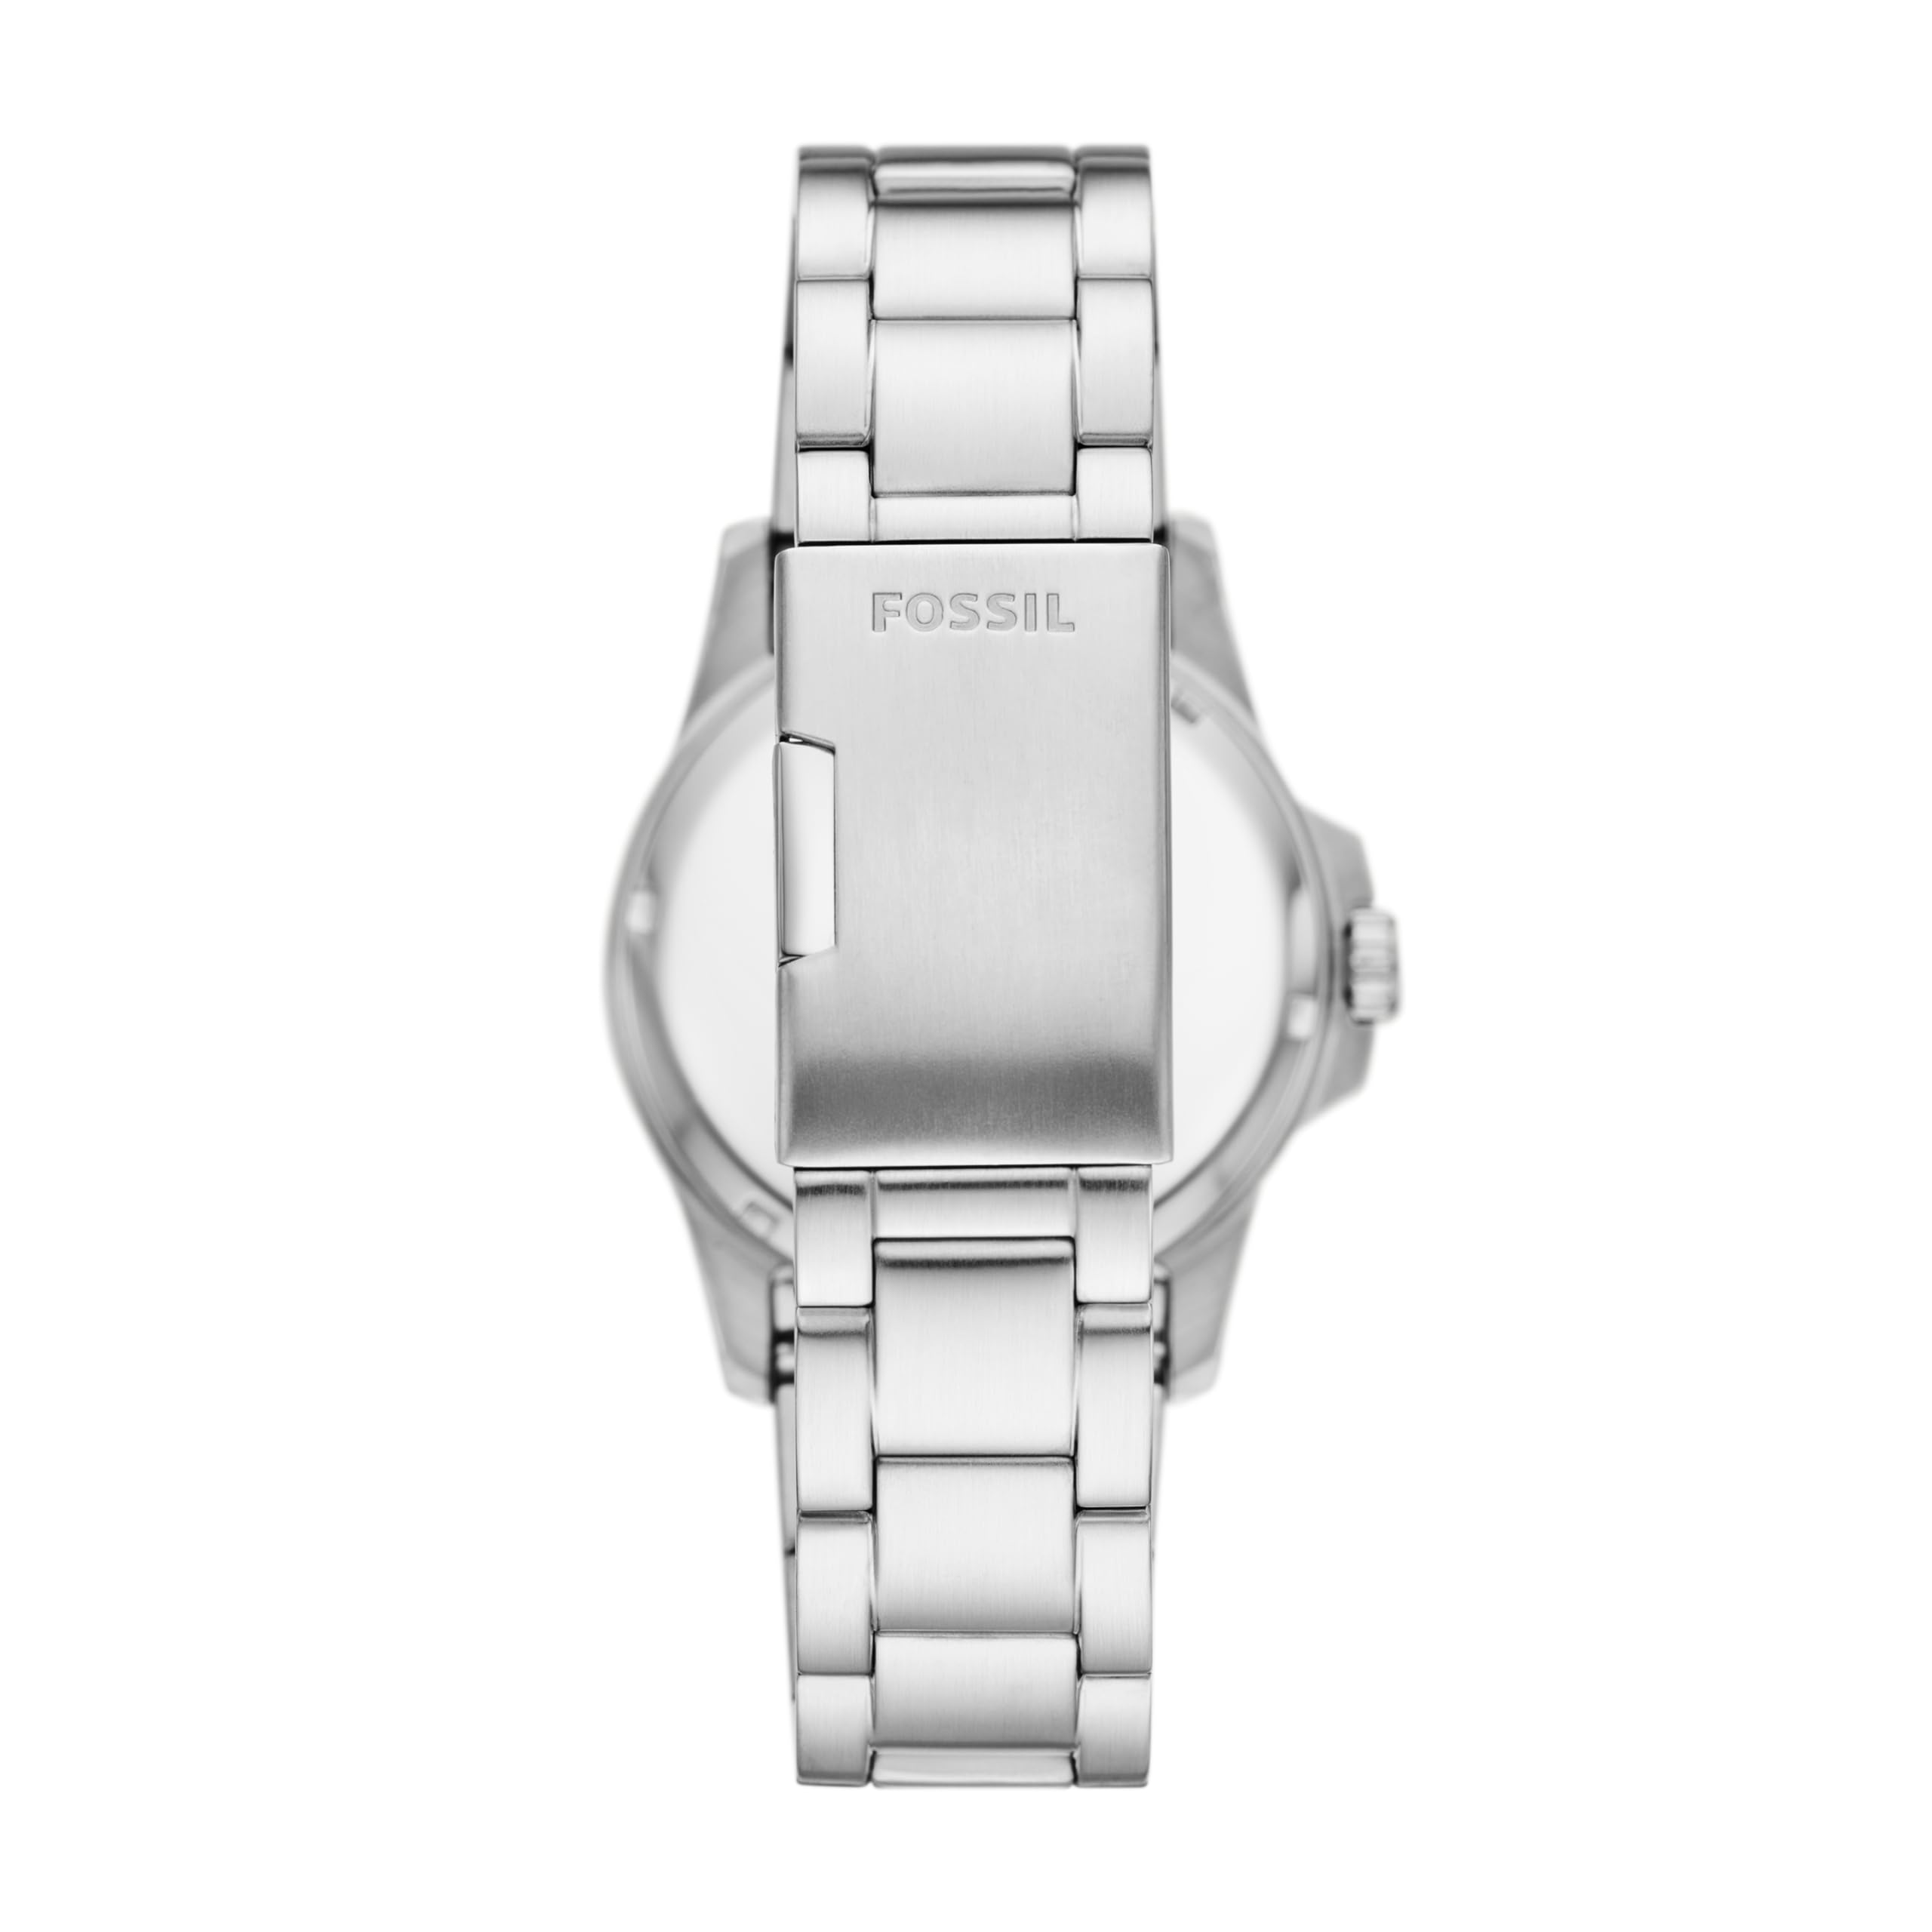 Fossil Men's Blue Quartz Stainless Steel Three-Hand Watch, Color: Silver/Black Taper (Model: FS6032)